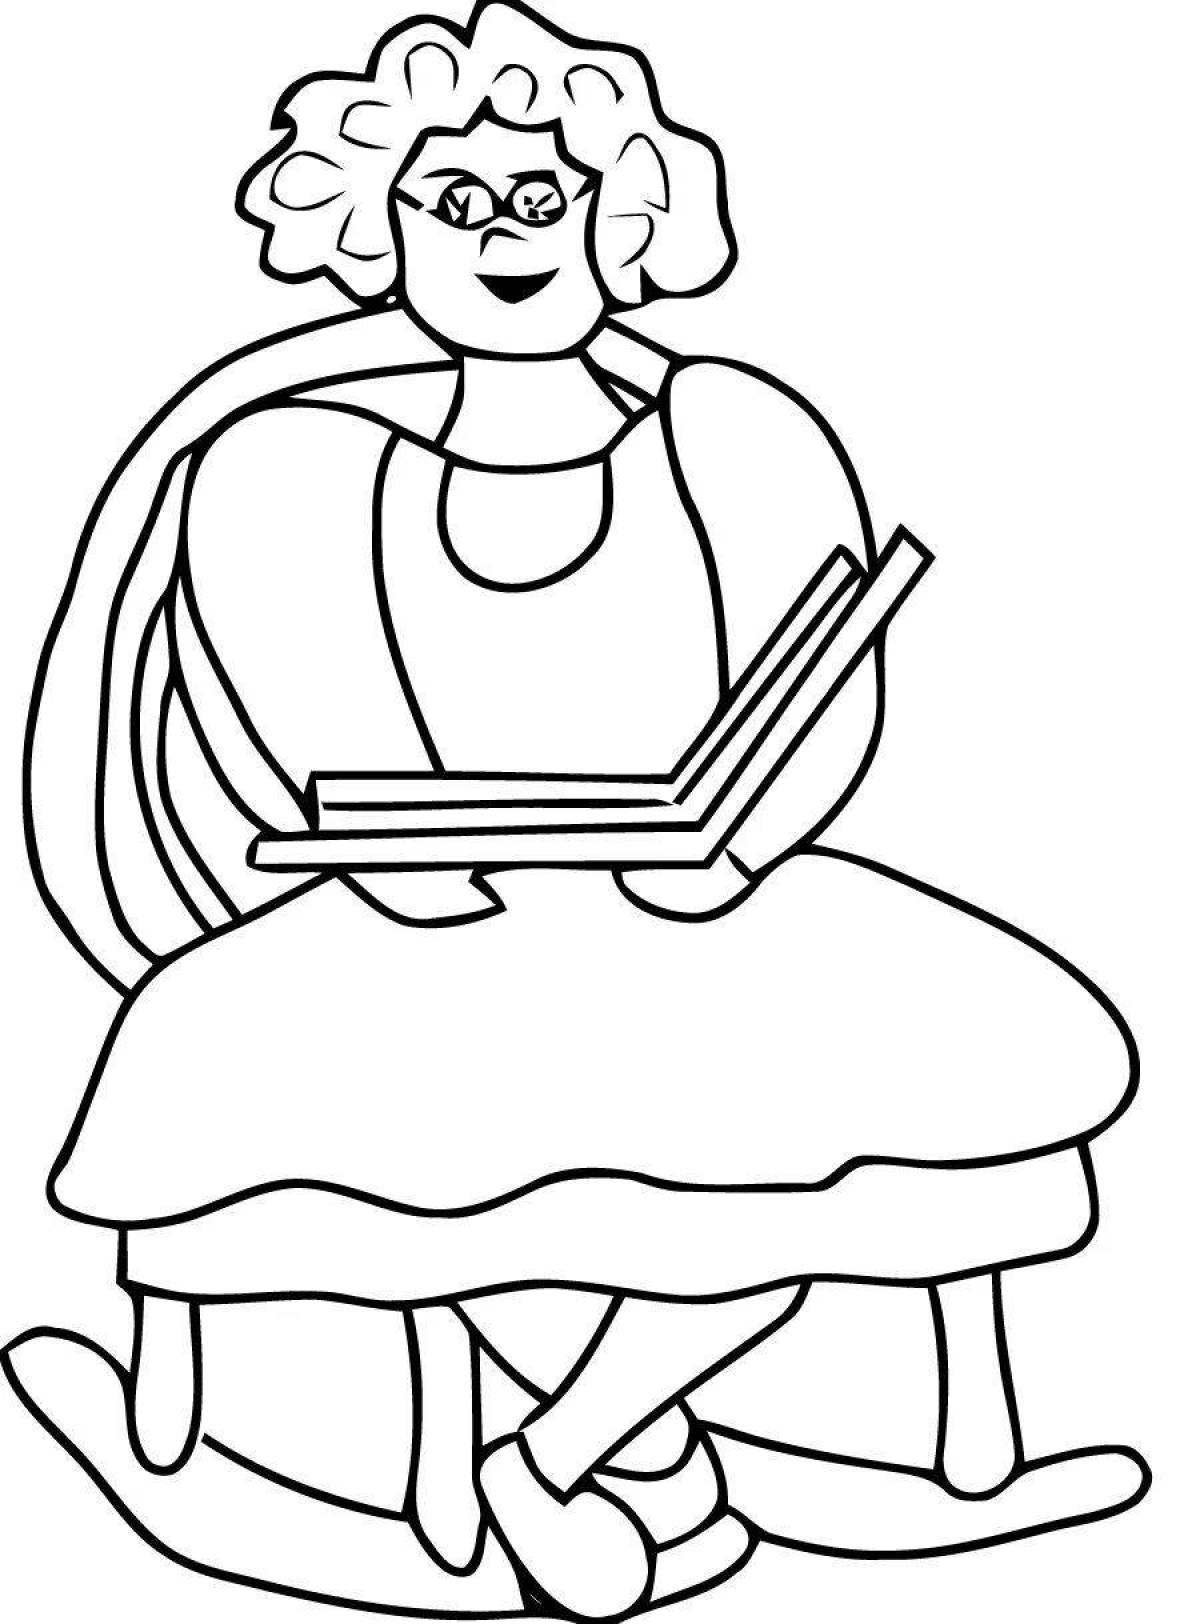 Exciting grandparents coloring page